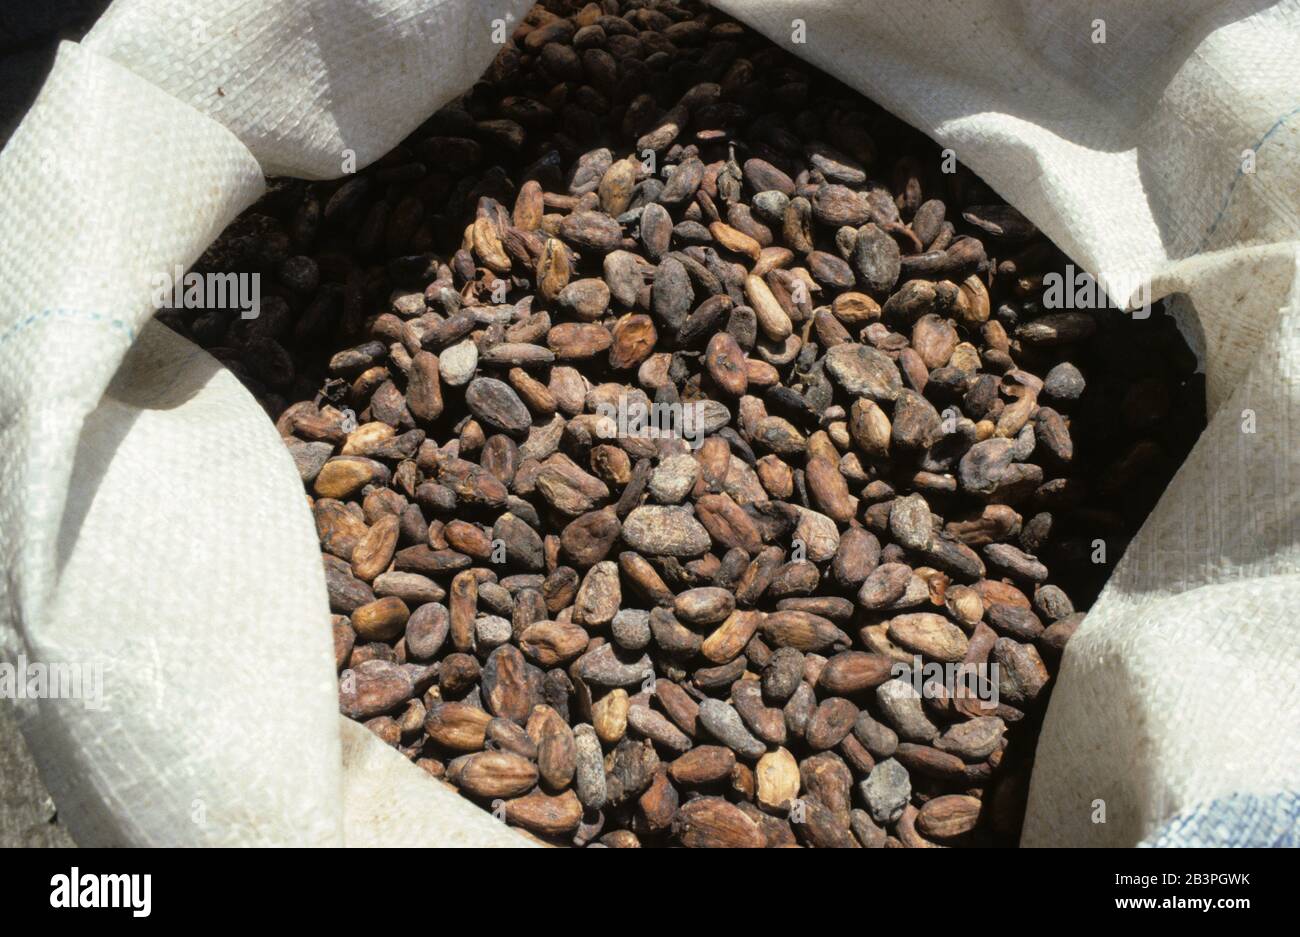 Dried fermented cocoa (Theobroma cacao) beans in a sack for processing into chocolate and other products, Mindanao, Philippines, February Stock Photo